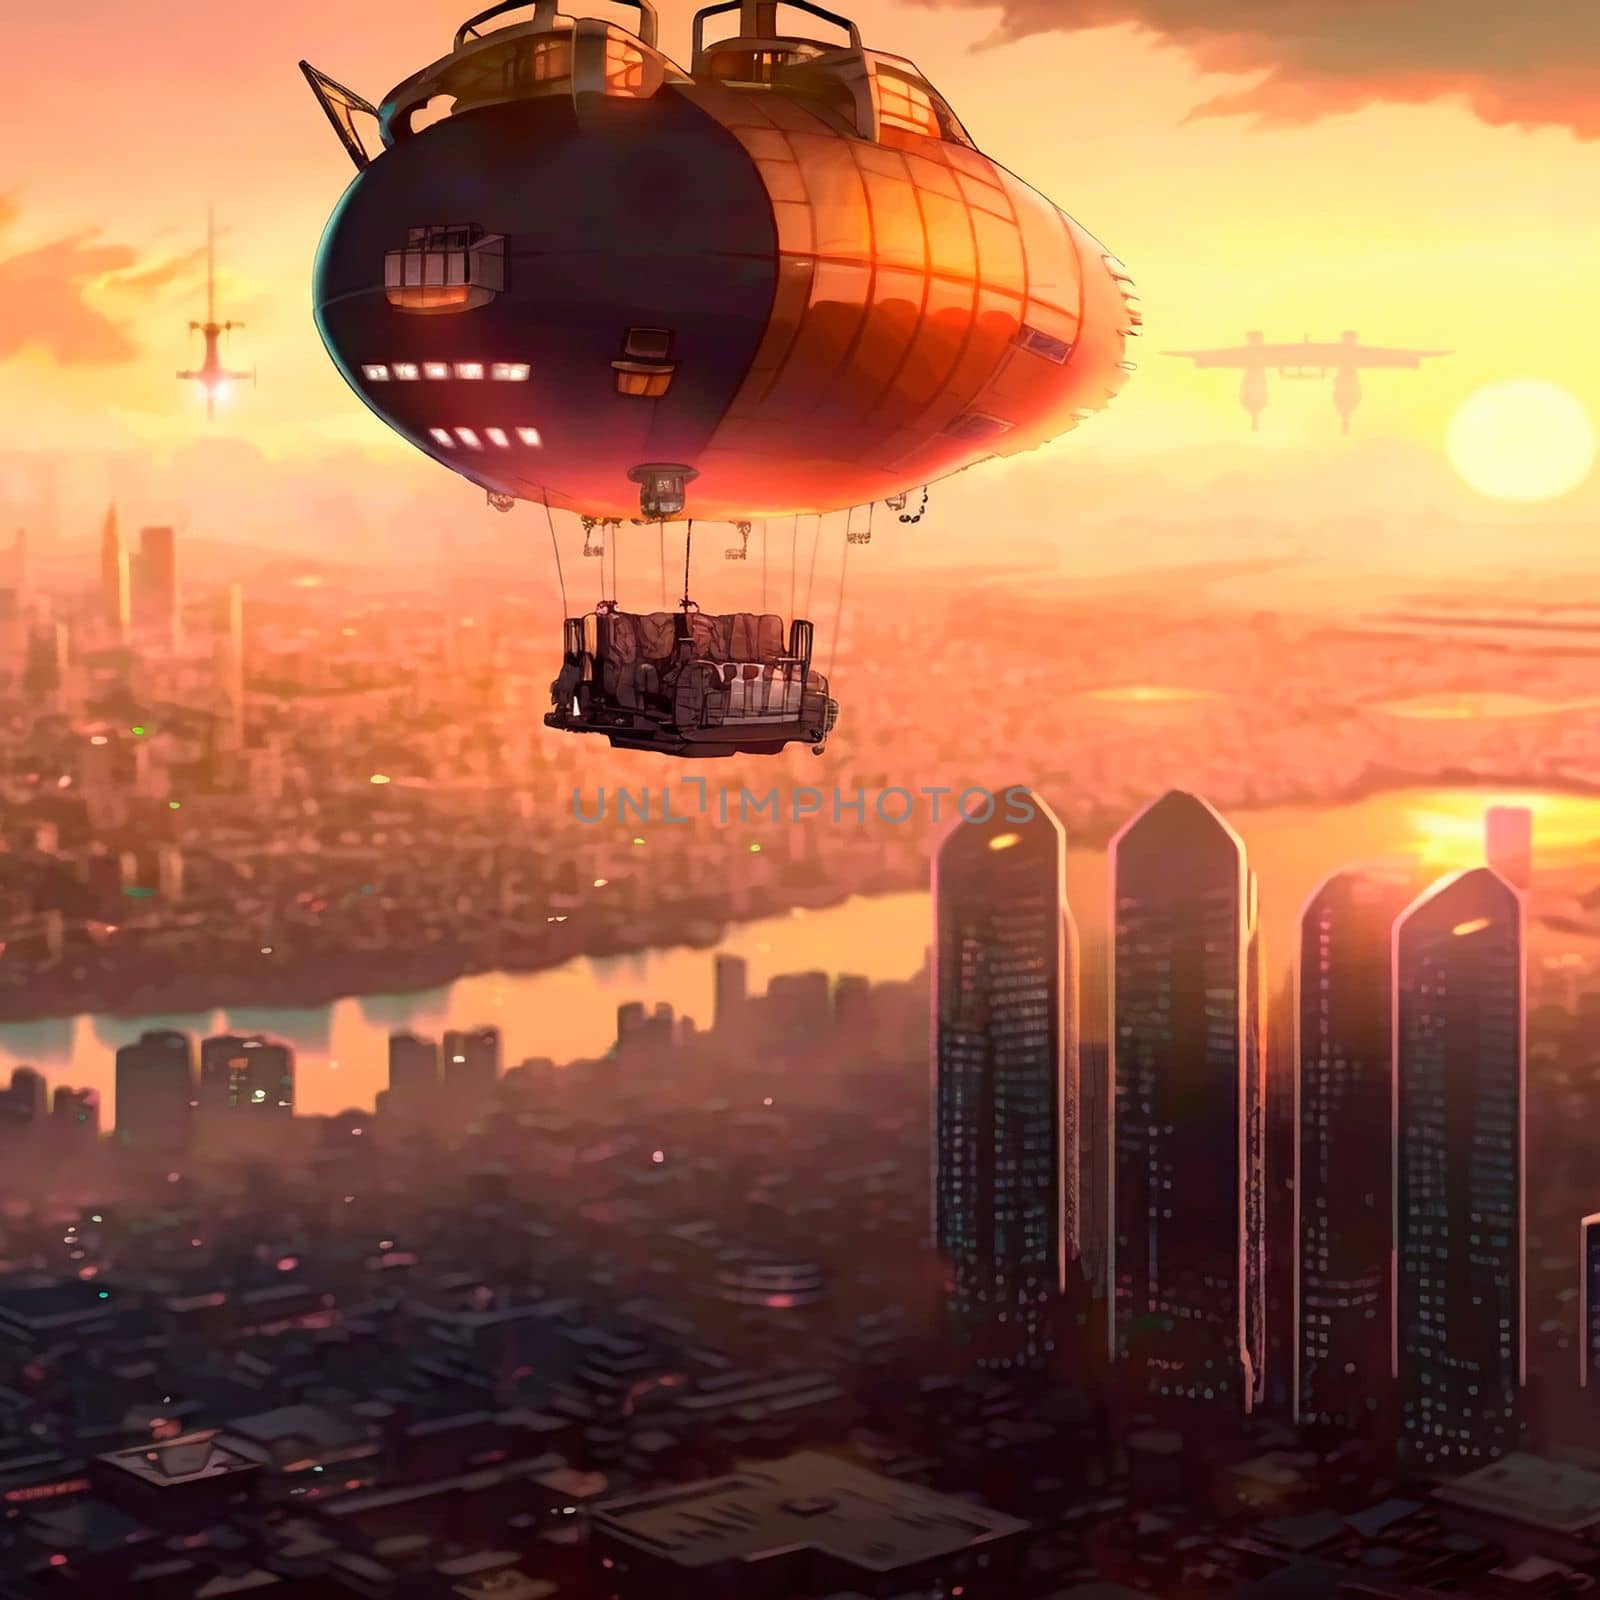 Steampunk airship flies over a modern city. High quality illustration